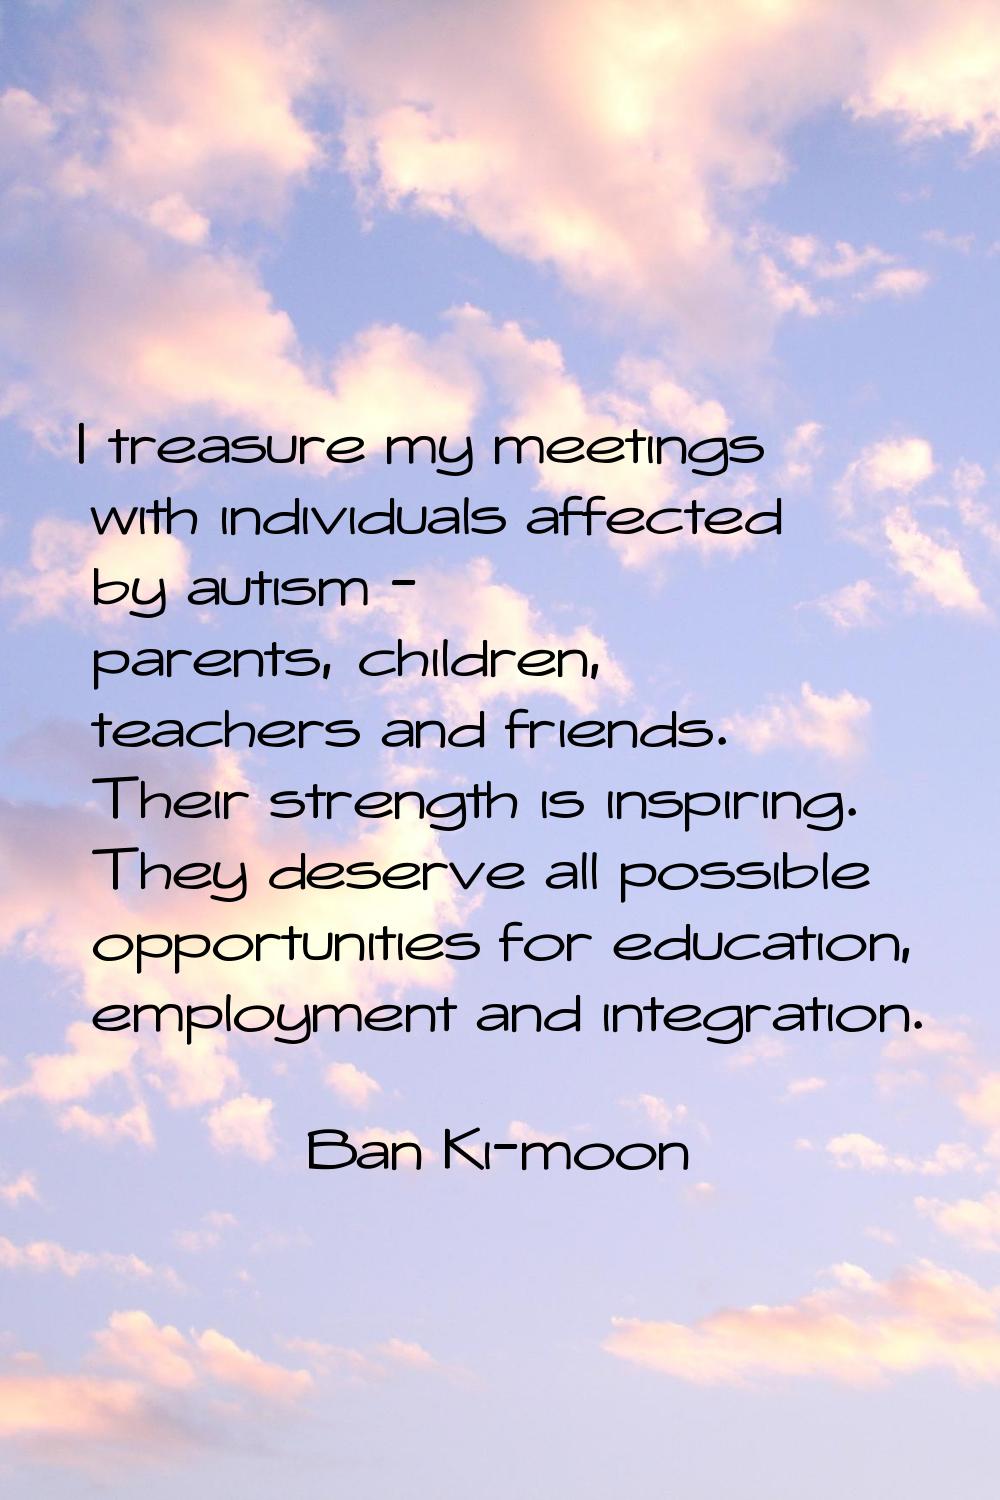 I treasure my meetings with individuals affected by autism - parents, children, teachers and friend